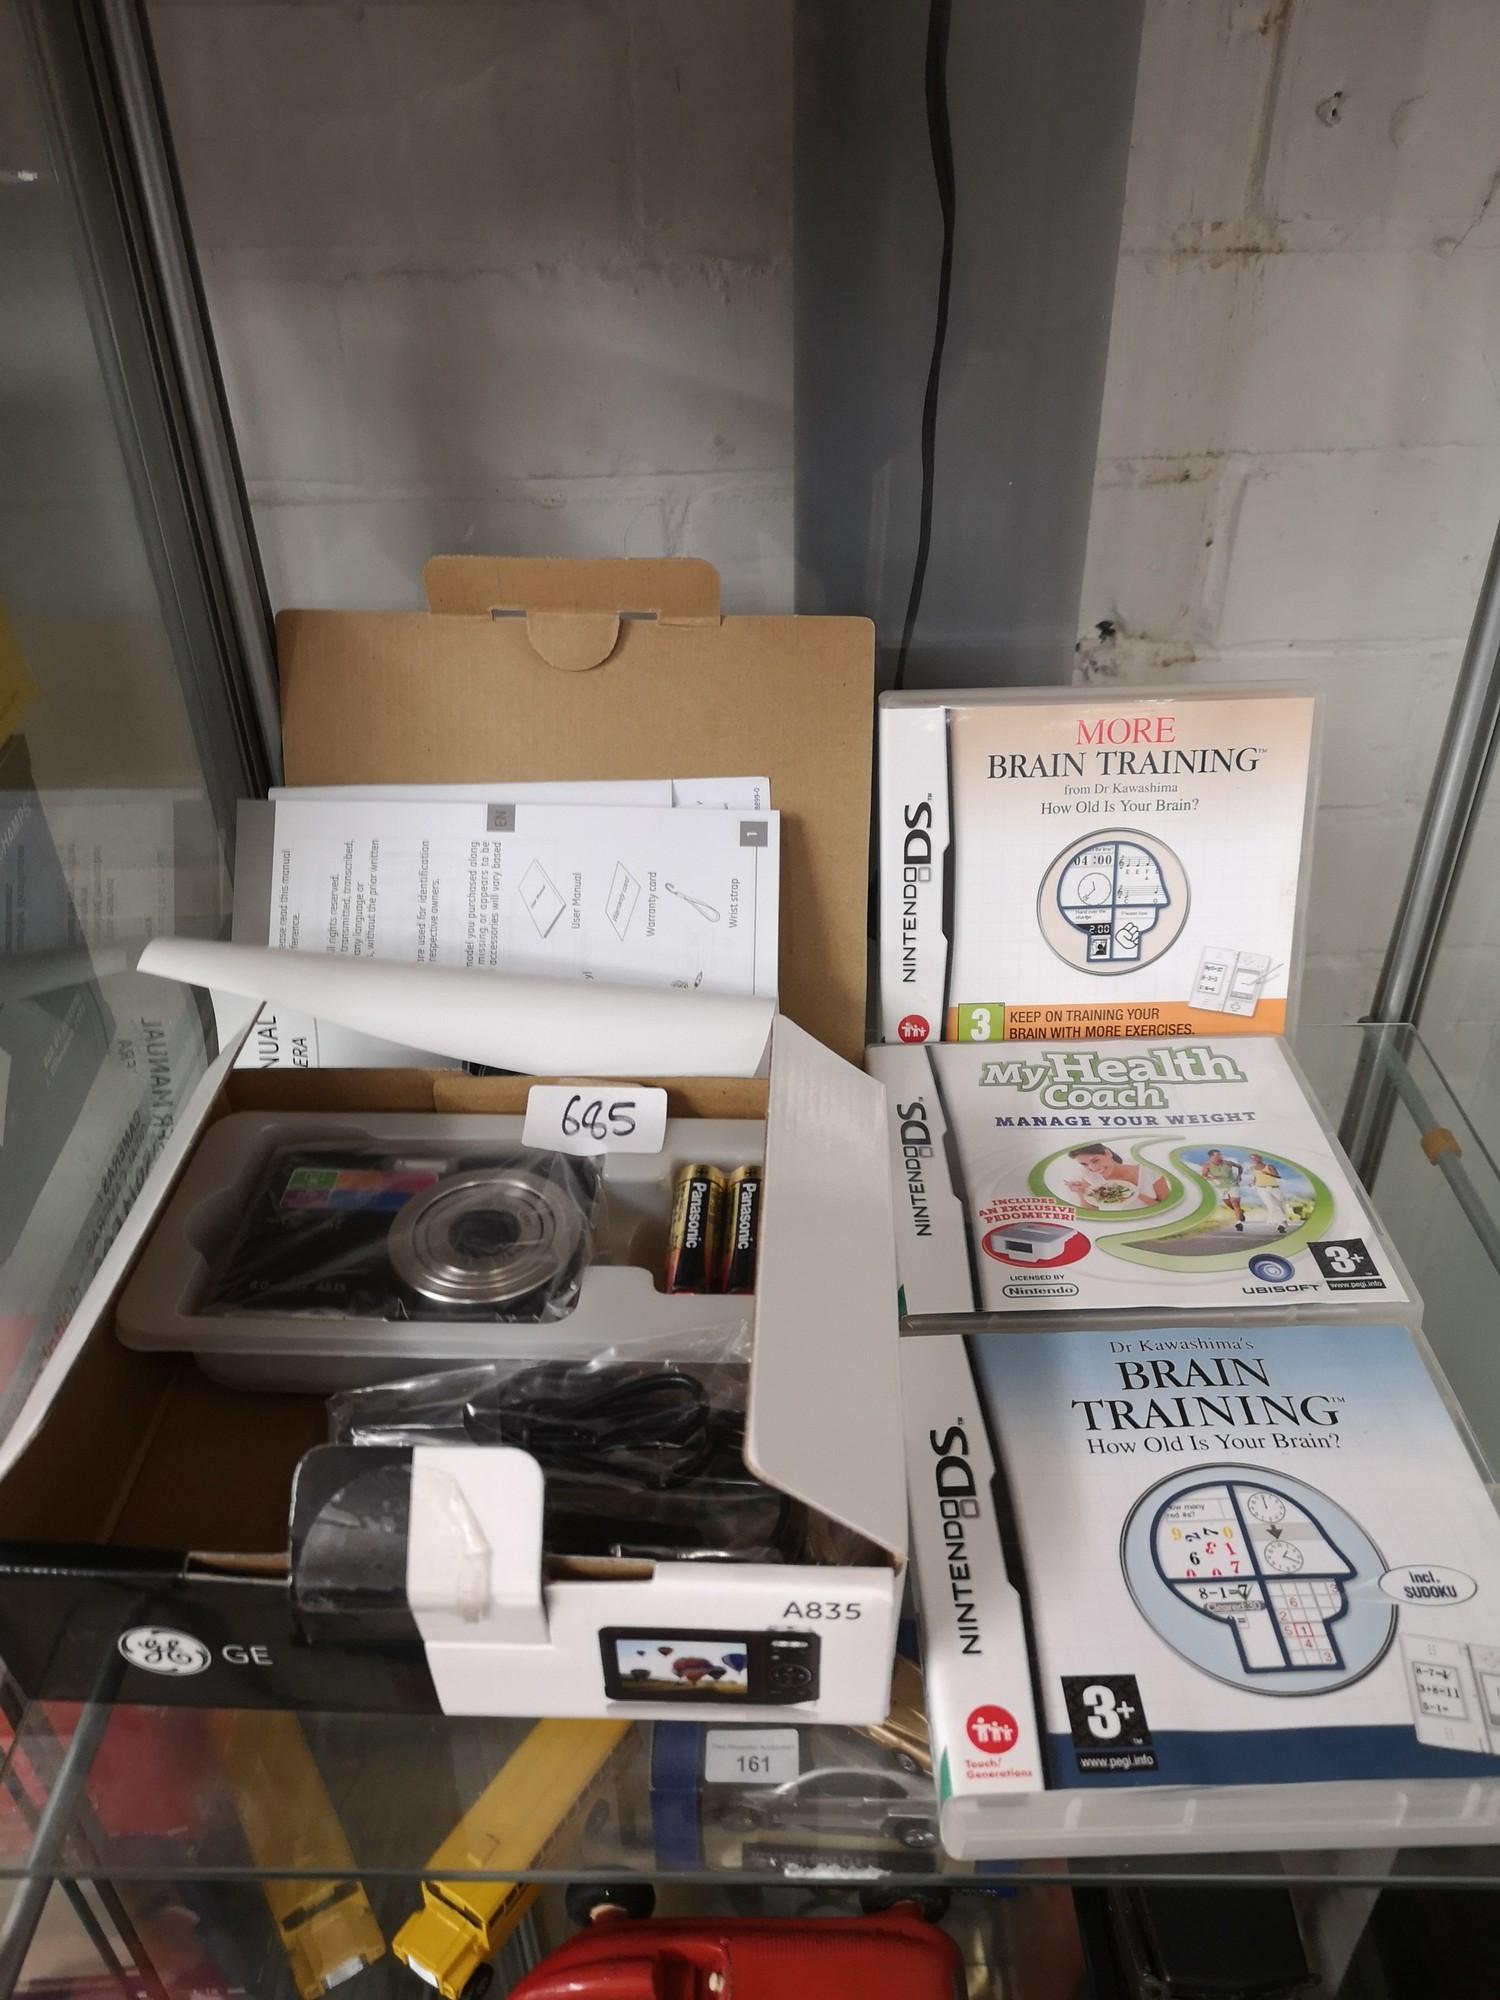 Camera boxed together with nintendo ds games.